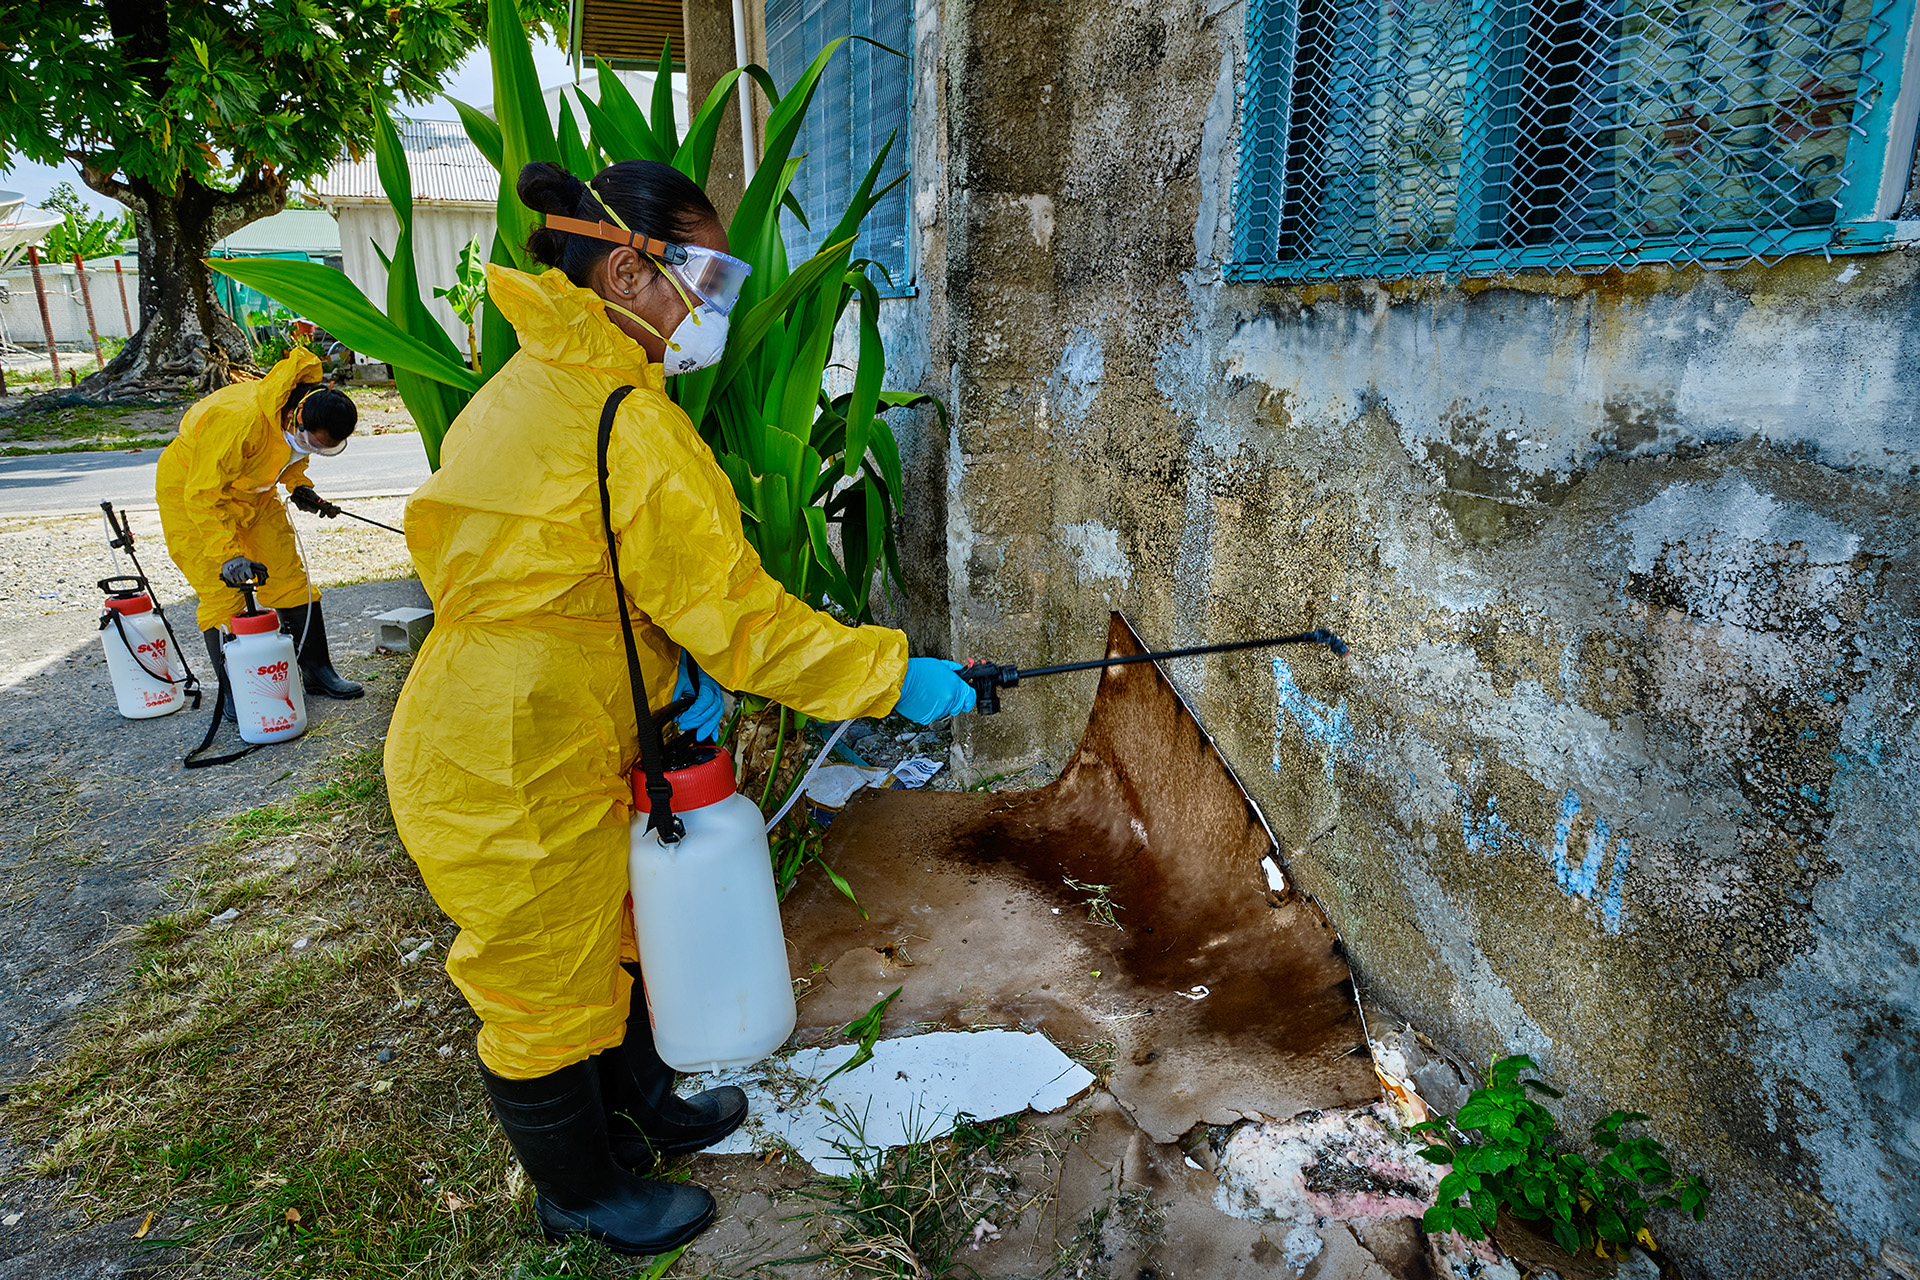 Community health workers wearing Personal Protective Equipment (PPE) spraying insecticide to control mosquito larvae in the communities of Tuvalu.